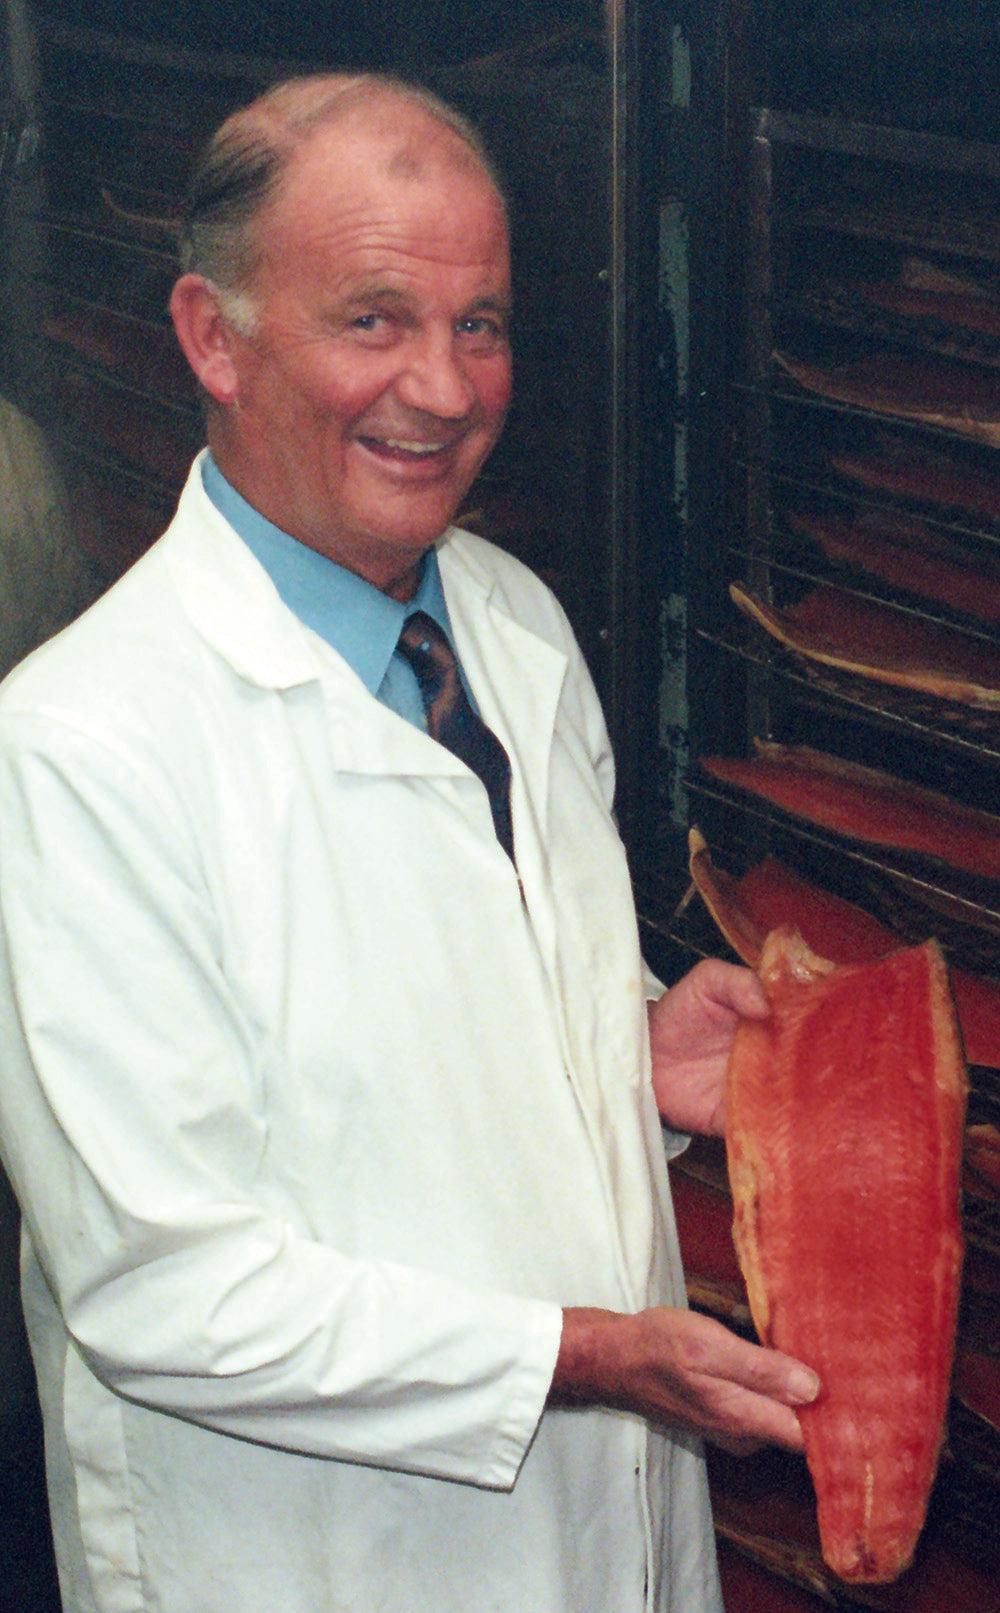 Michael Wrights founder with Salmon